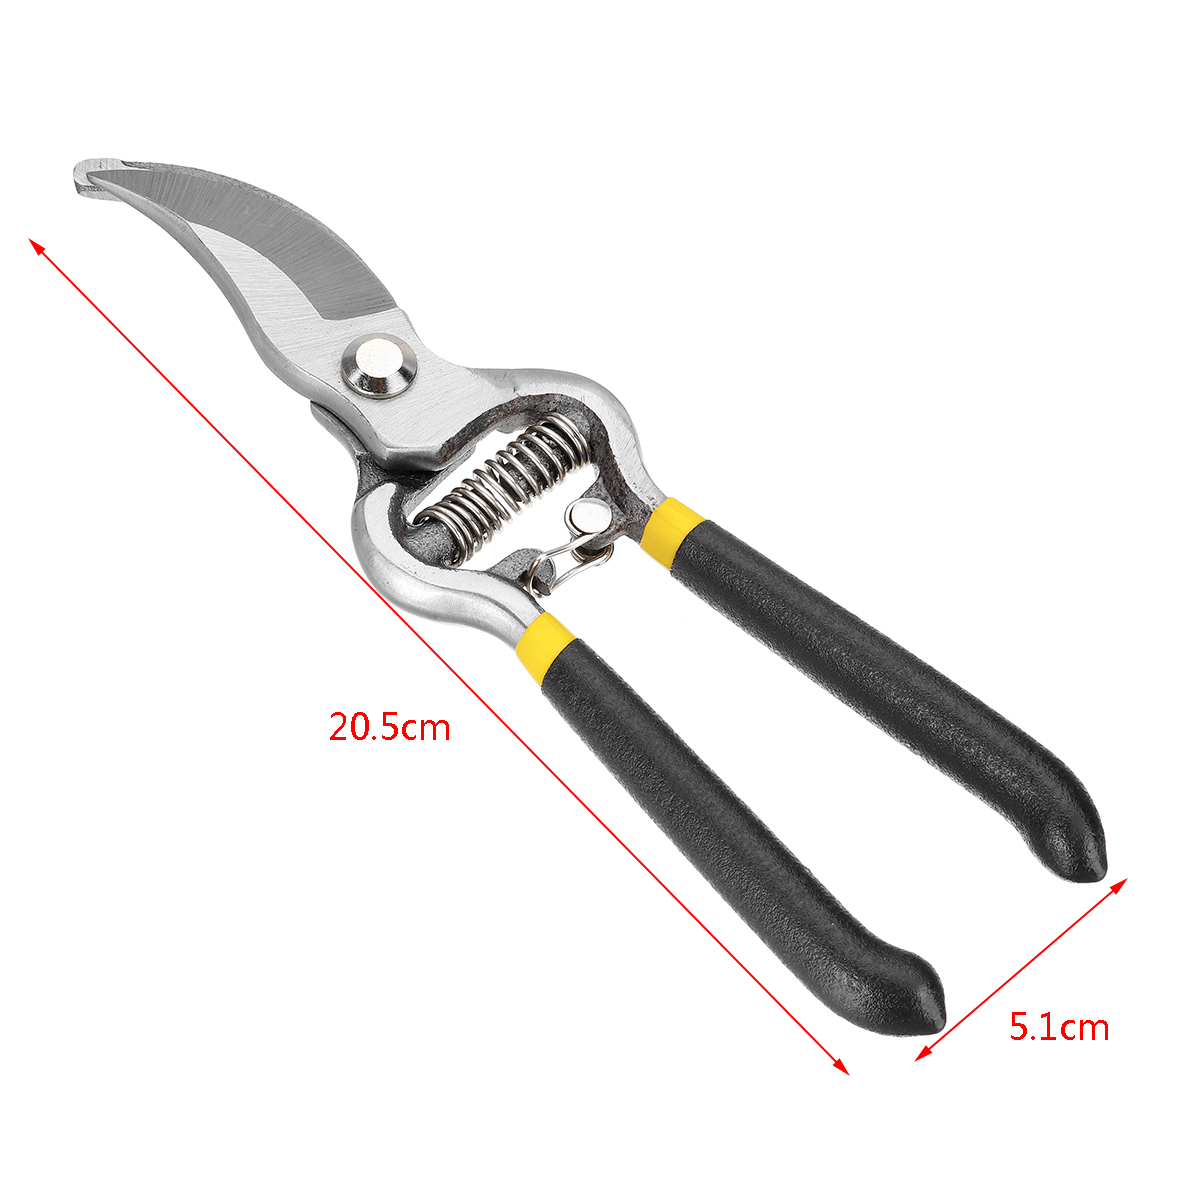 8inch-Carbon-Steel-Professional-Loppers-Garden-Cutter-Bypass-Tree-Pruning-Shears-Clippers-1412616-8